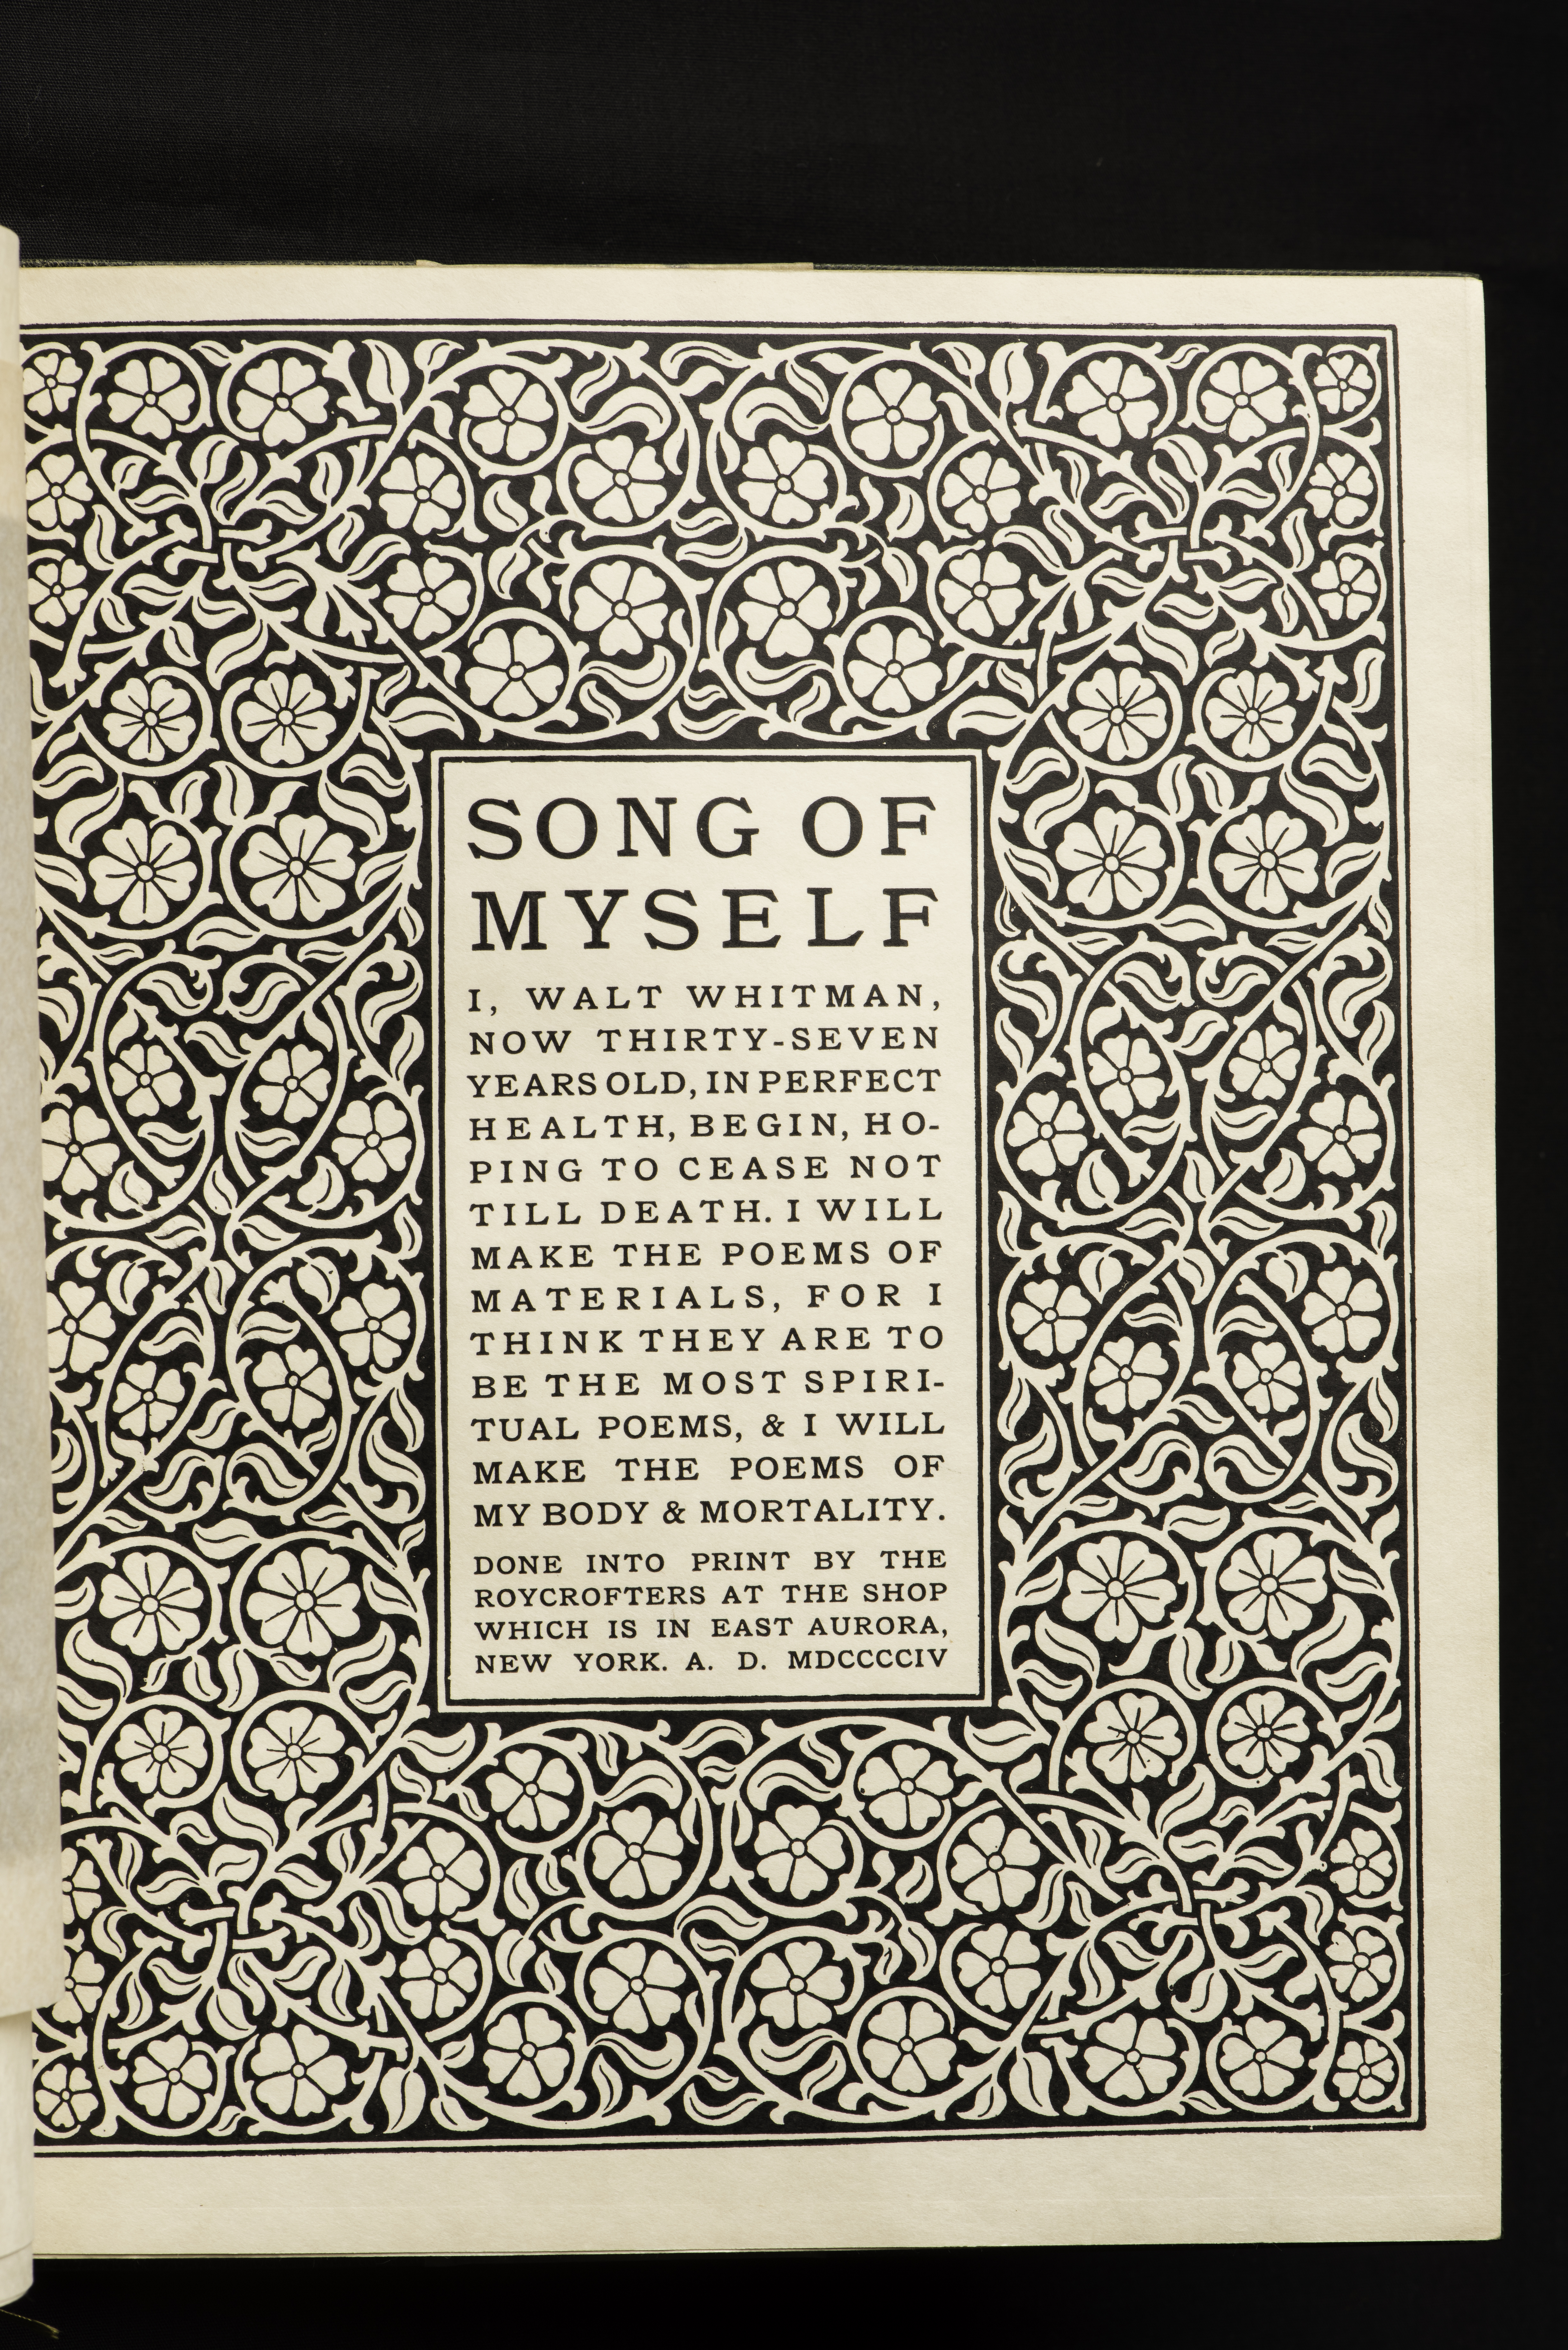 The Roycrofters, a reformist community, published this 1904 edition of  “Song of Myself” in East Aurora, New York. Their work in printing,  furniture-making, and other forms of design is a hallmark of the Arts  and Crafts movement, shaping American design in the late 19th and early  20th centuries, says Lacher-Feldman, who calls this title page “an  exemplar of Arts and Crafts design.” (Department of Rare Books & Special Collections / Photo by J. Adam Fenster)